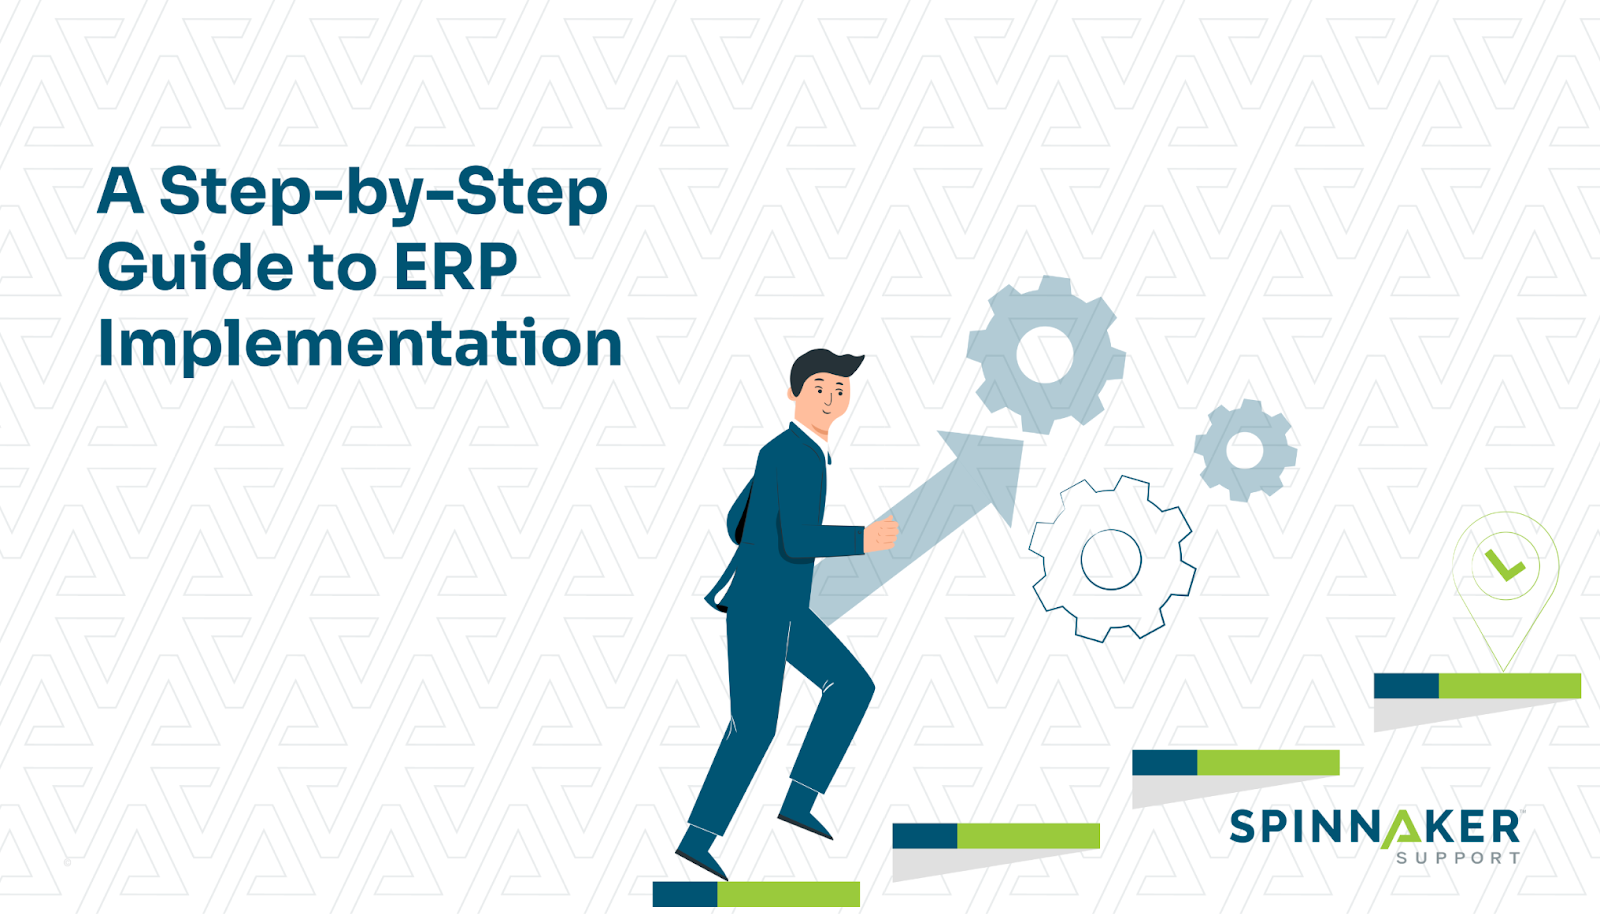 How to implement an ERP system step by step